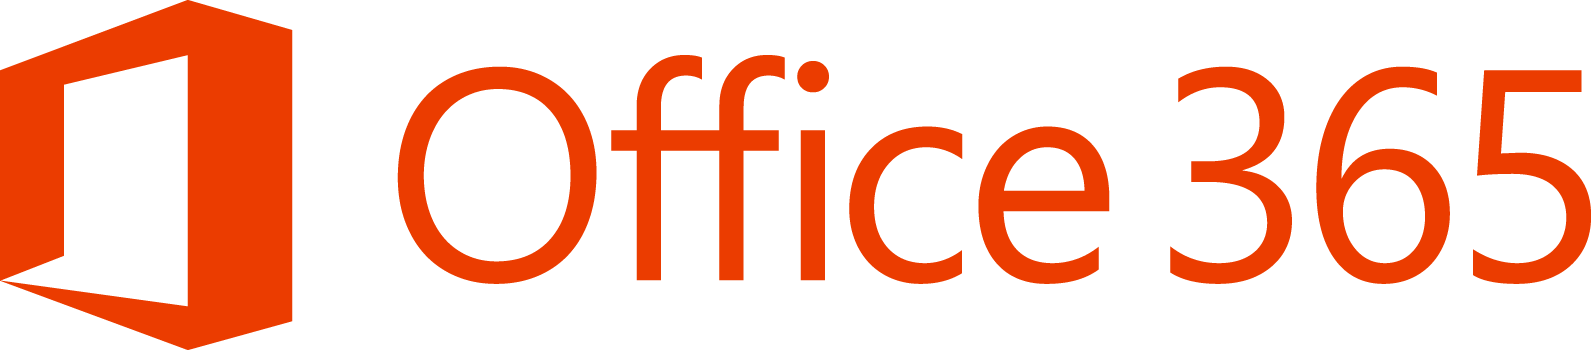 Office 365 Cloud Logo - Cloud Technologies - Office 365 integration, training, and management